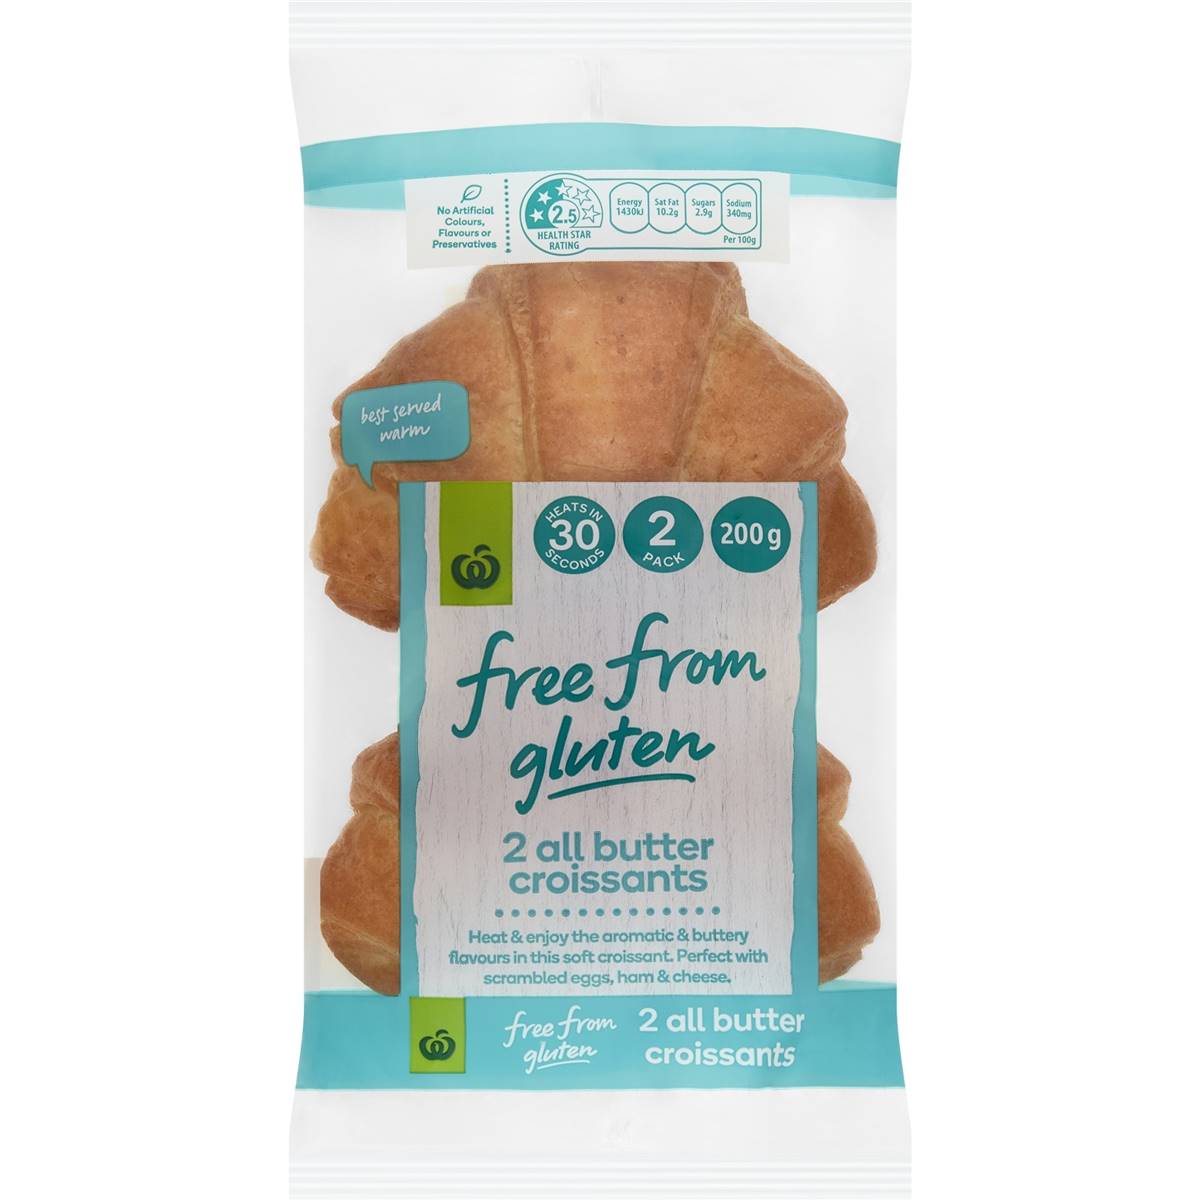 Calories in Woolworths Free From Gluten Croissants